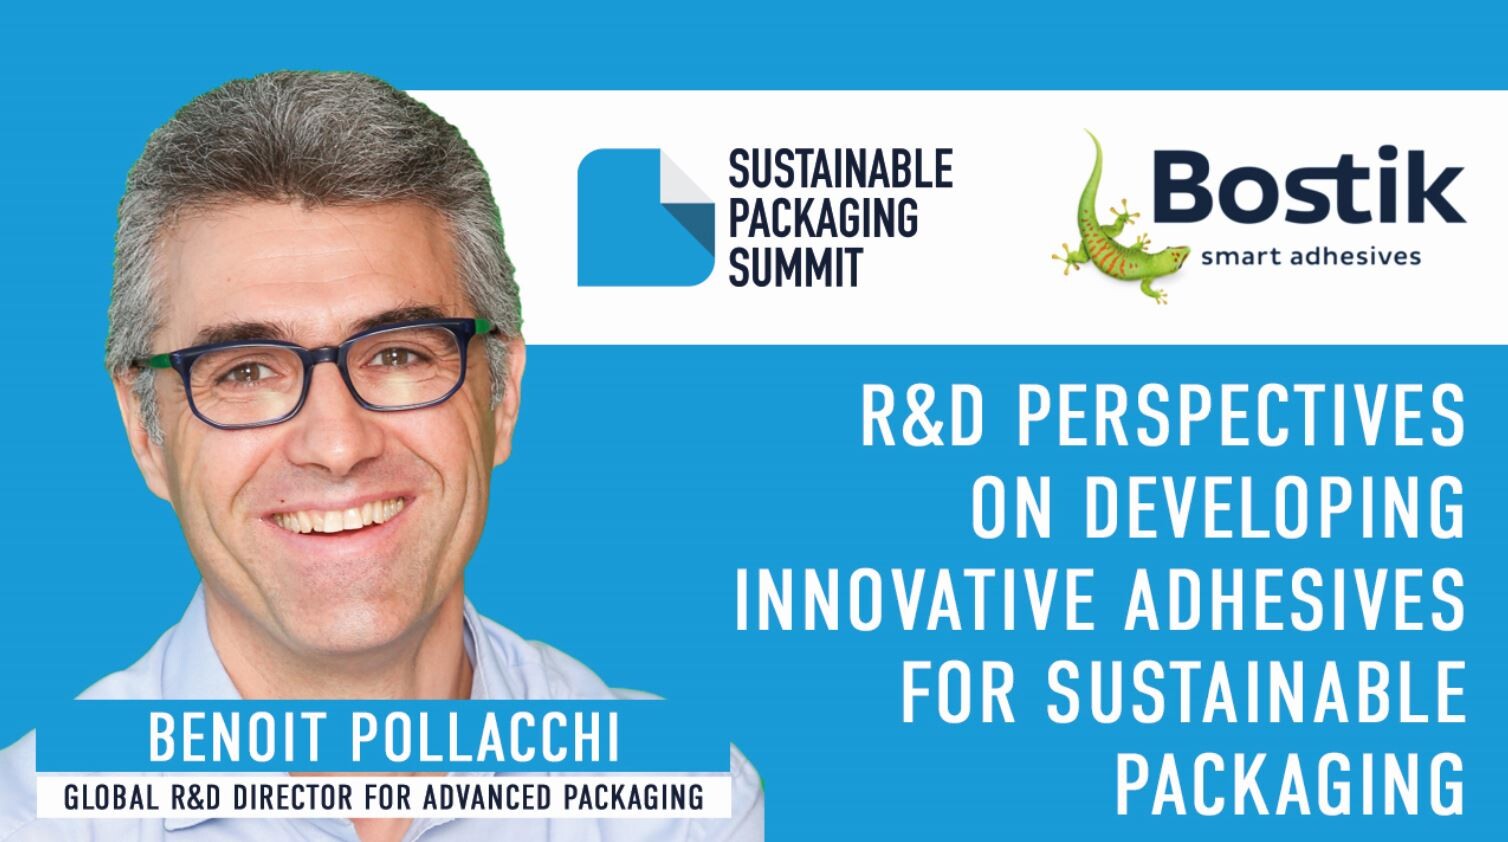 Benoit Pollacchi - R&D perspectives on developing innovative adhesives for sustainable packaging